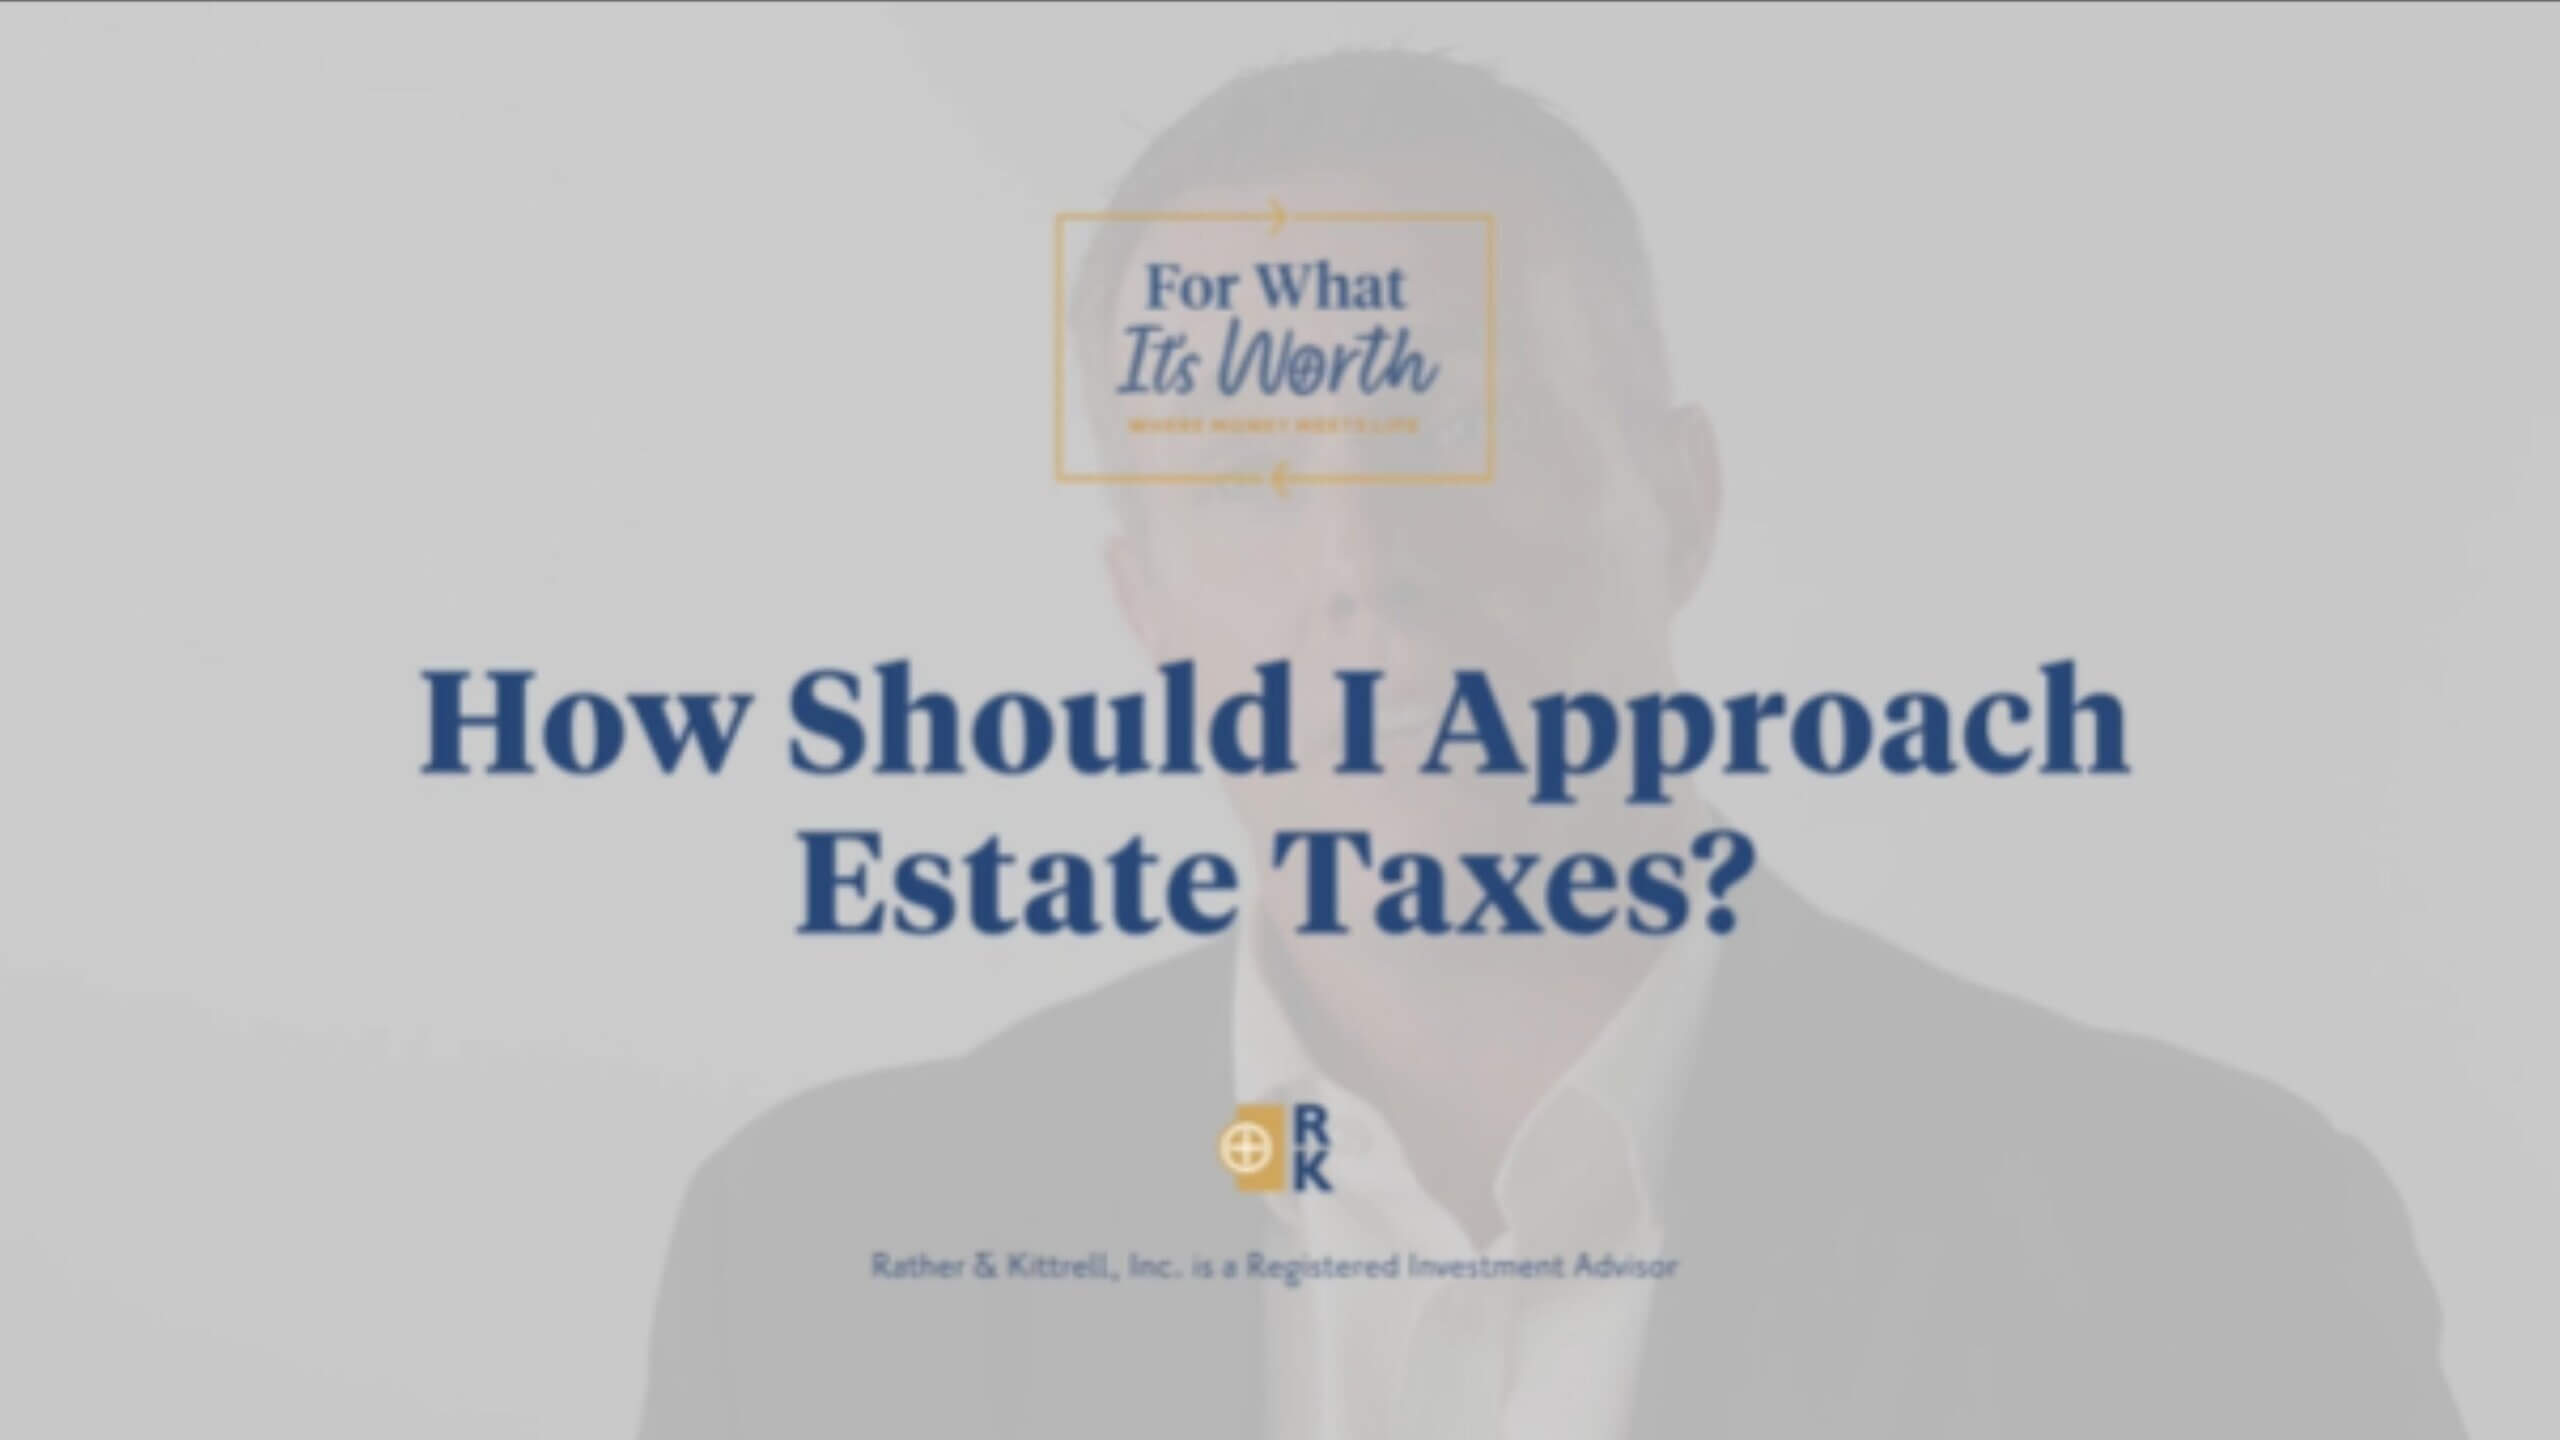 How should I approach estate taxes?